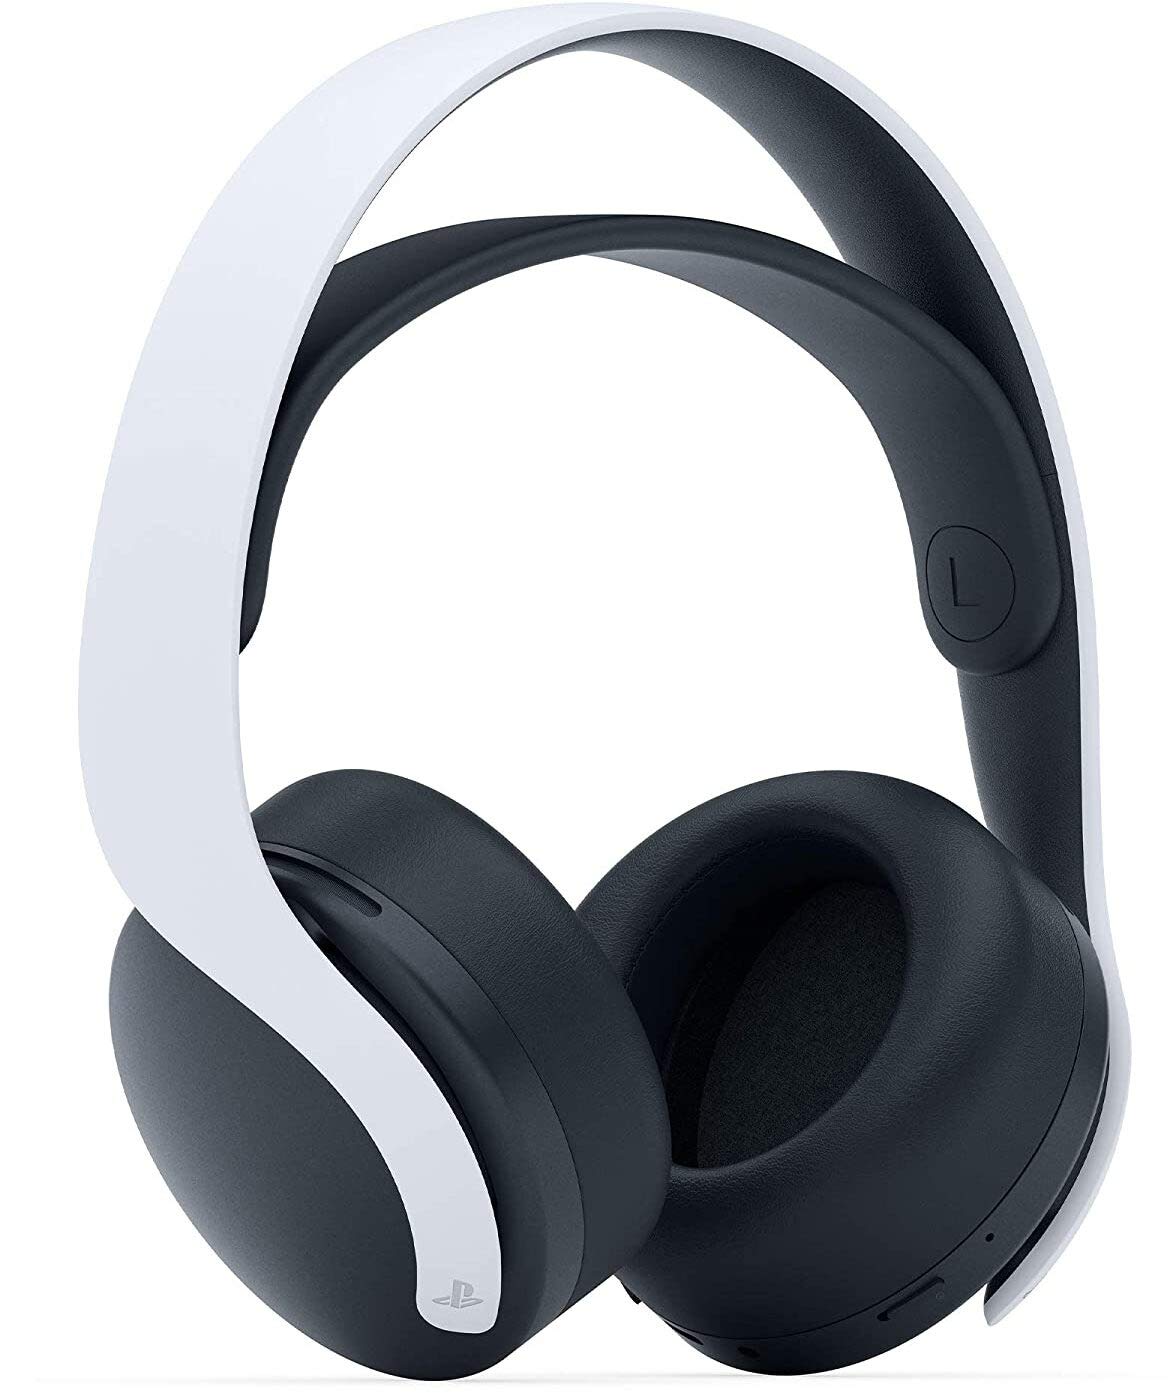 Ps5 Stereo Headset